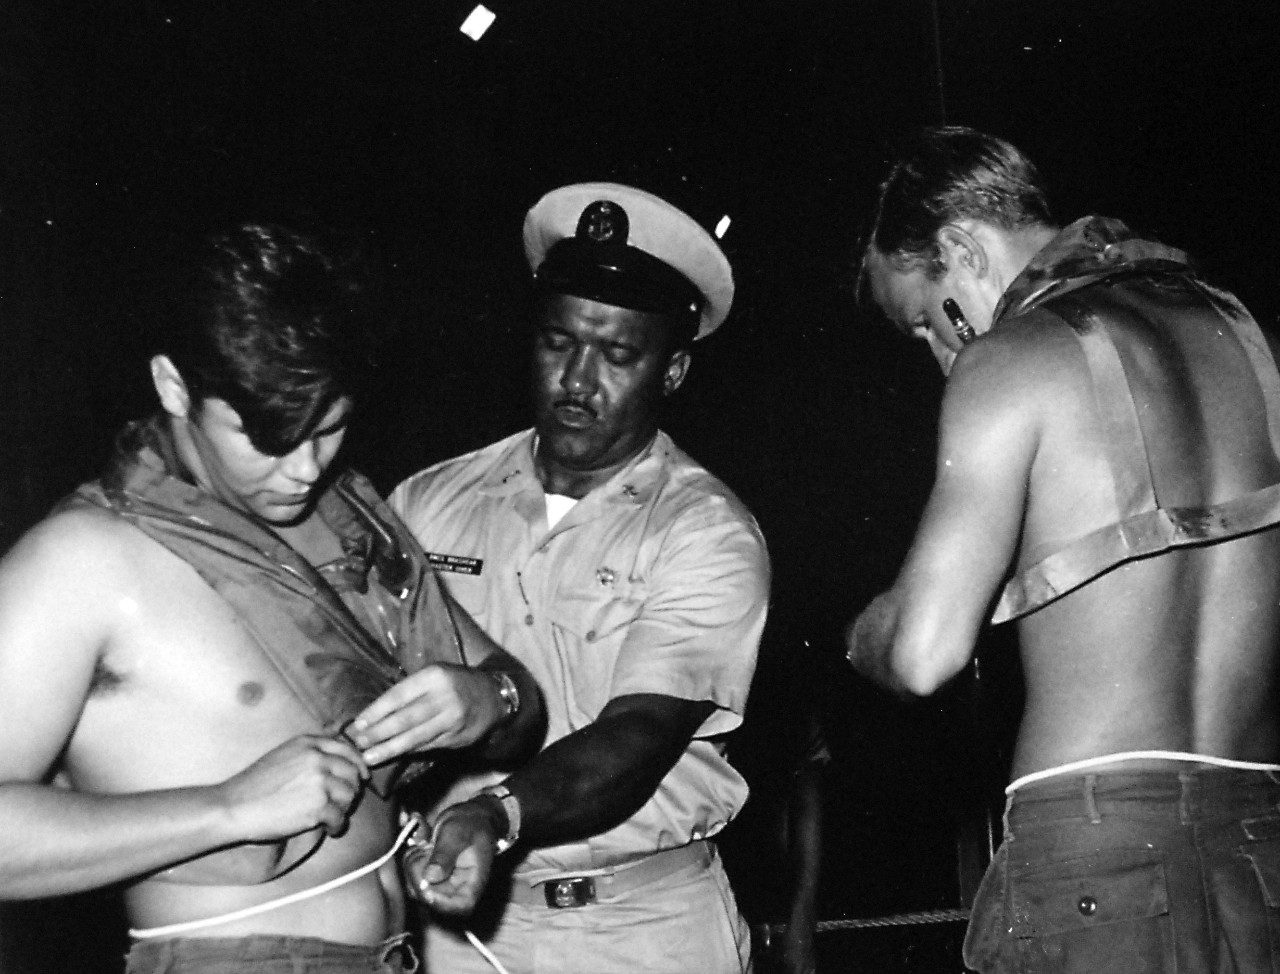 428-GX- USN 118932:  Senior Chief Boatswain’s Mate and Master Diver Carl M. Brashear, April 1971.  Brashear assists another diver as he prepares to enter the water from USS Hunley  (AS-31).  Photographed by PHC A.J. Walker, April 22, 1971.  Official U.S. Navy Photograph, now in the collections of the National Archives.  